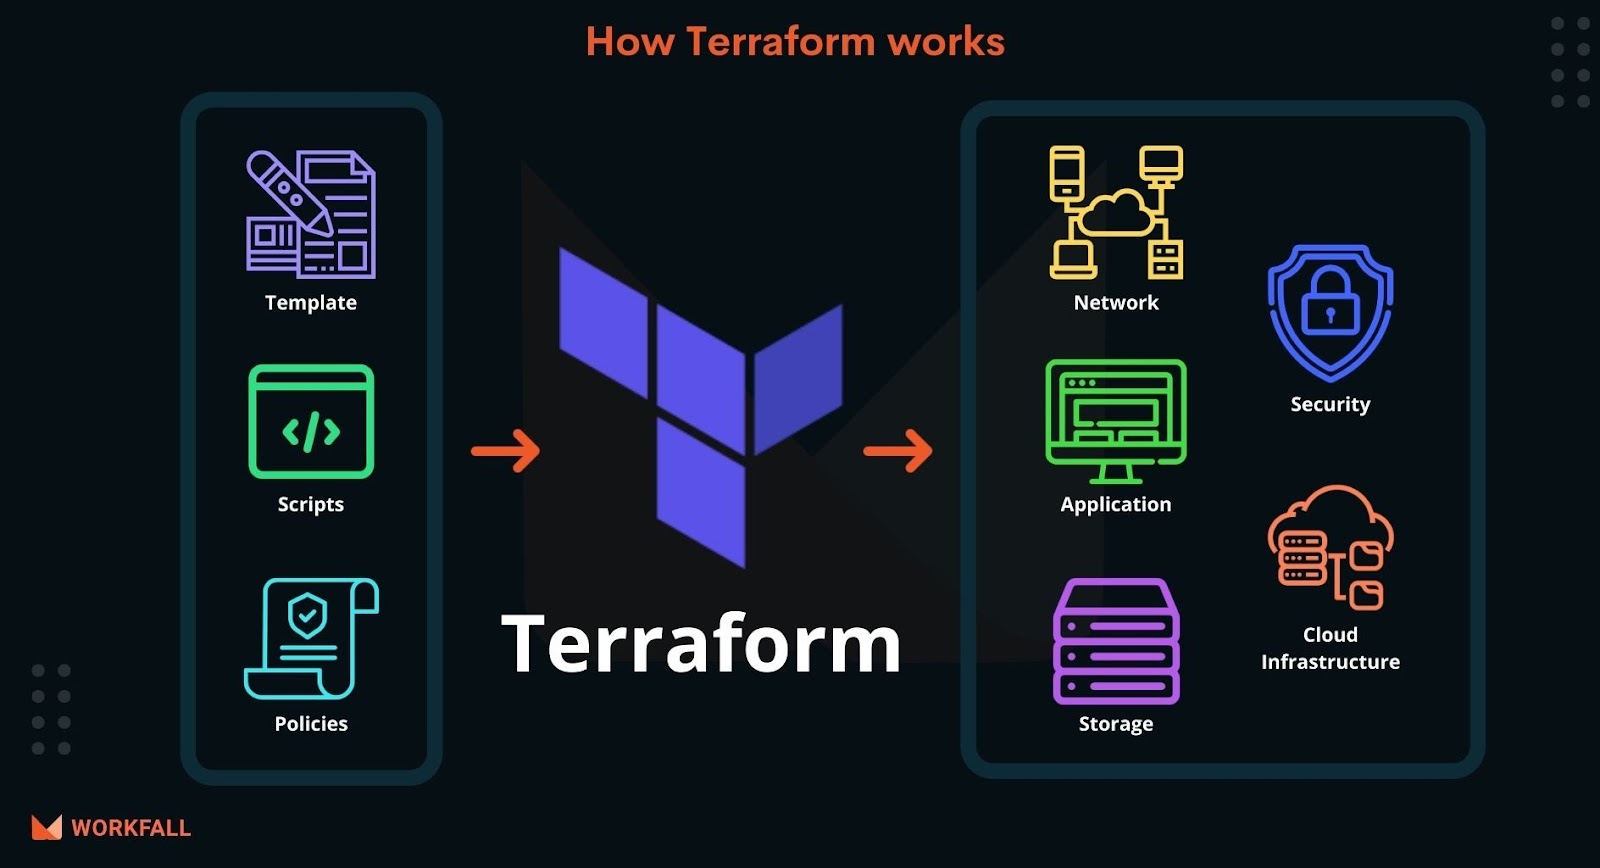 How to manage infrastructure as code (IaC) with Terraform on AWS?